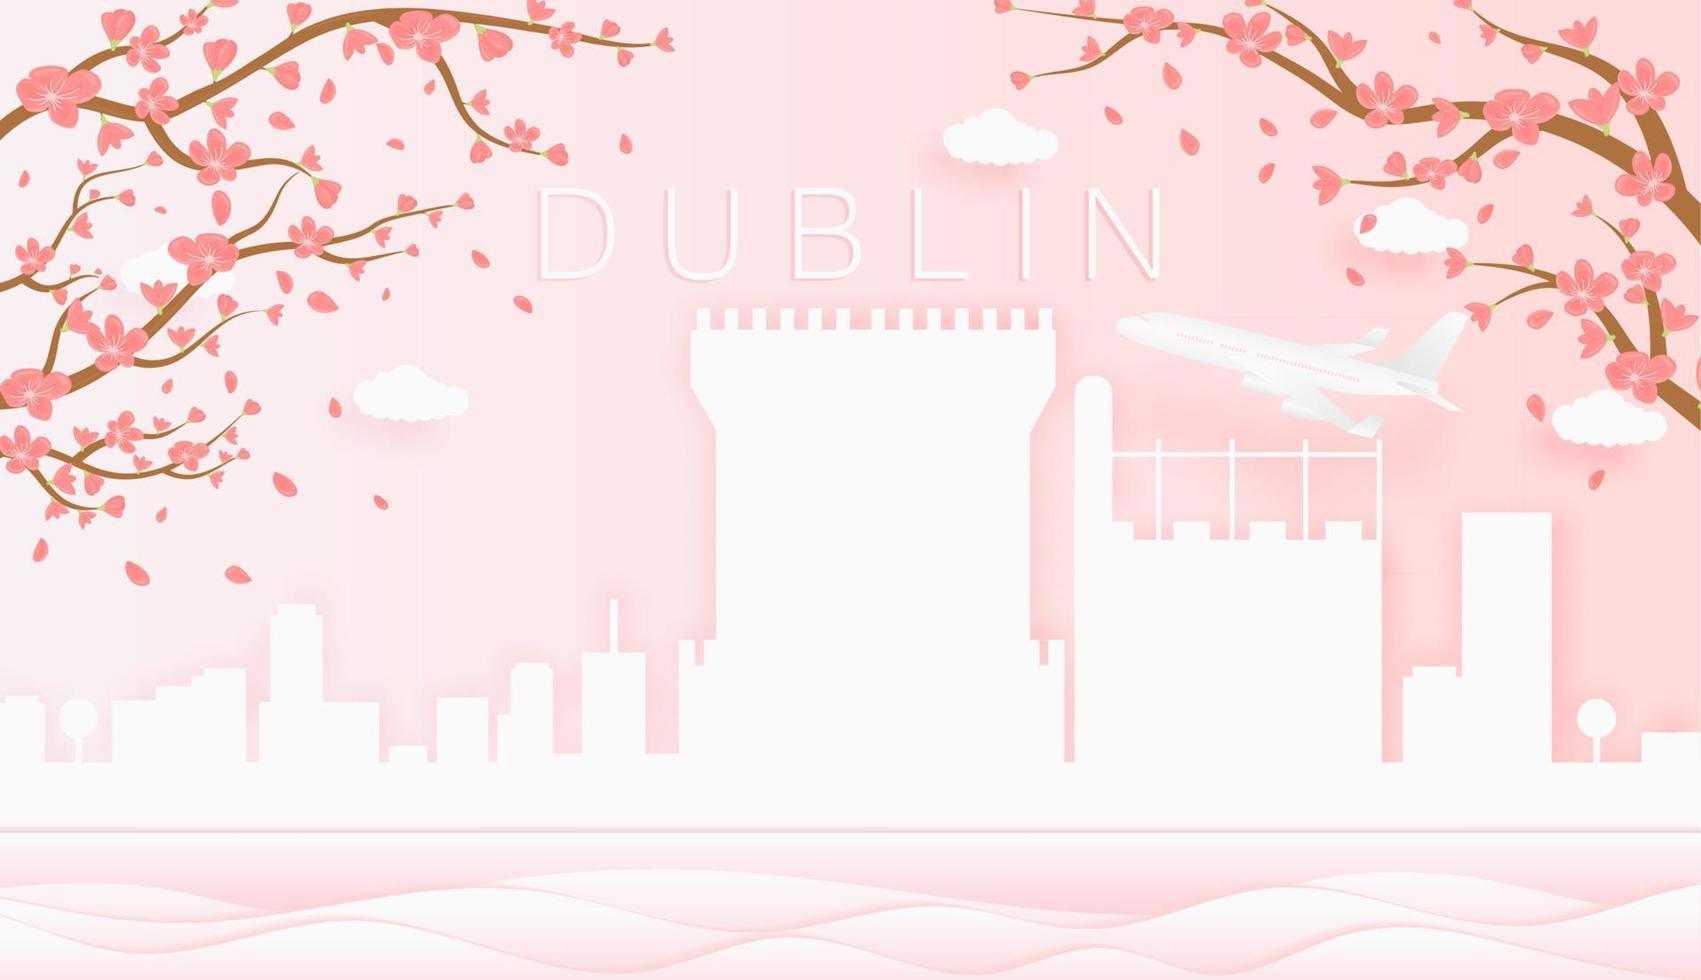 Panorama travel postcard, poster, tour advertising of world famous landmarks of Dublin, spring season with blooming flowers in tree vector